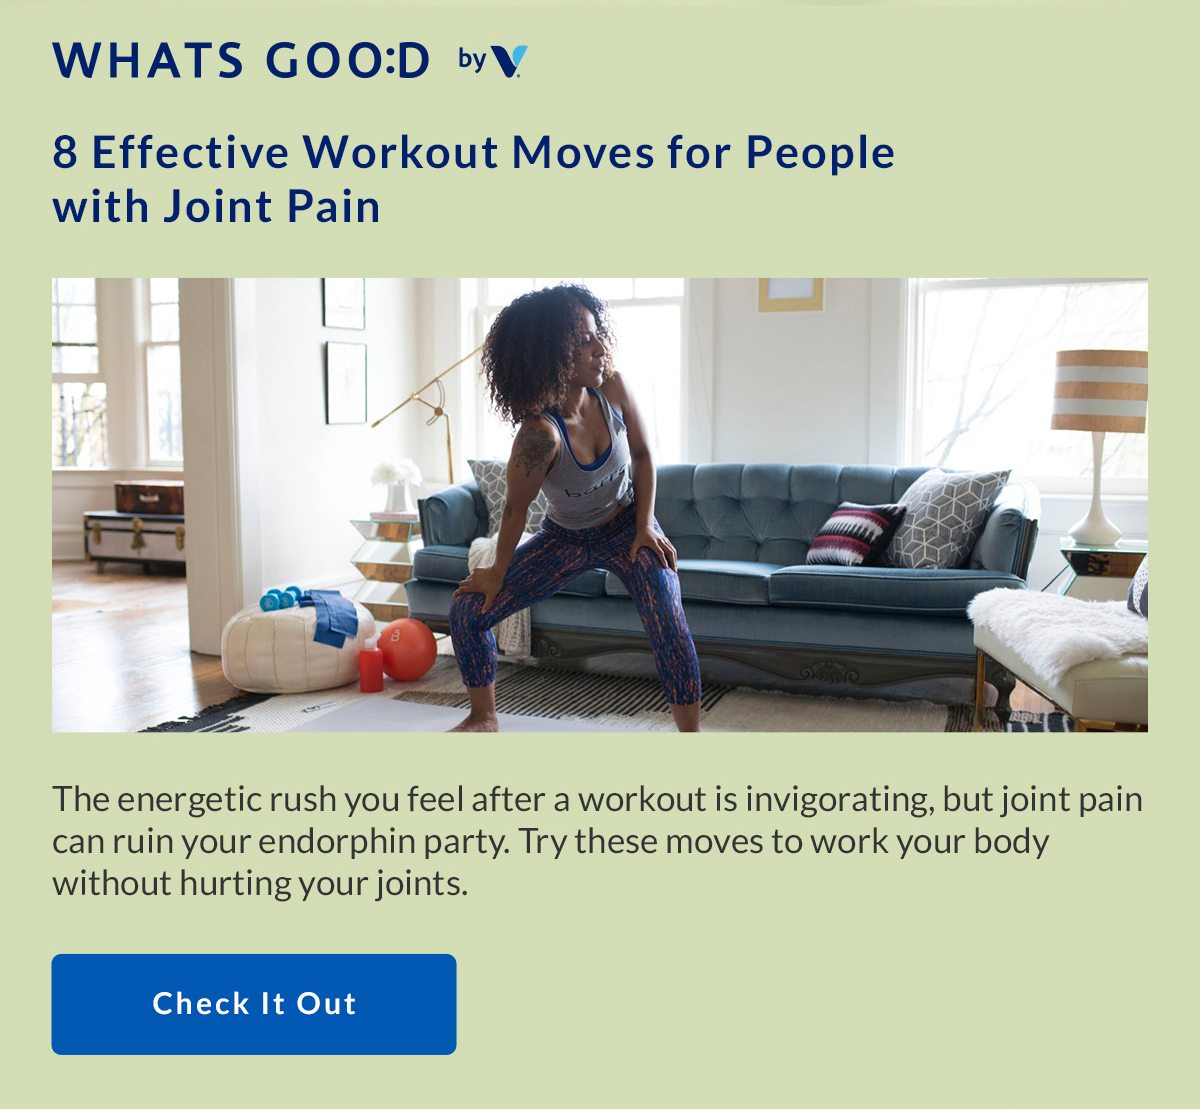 8 Effective Workout Moves for People with Joint Pain